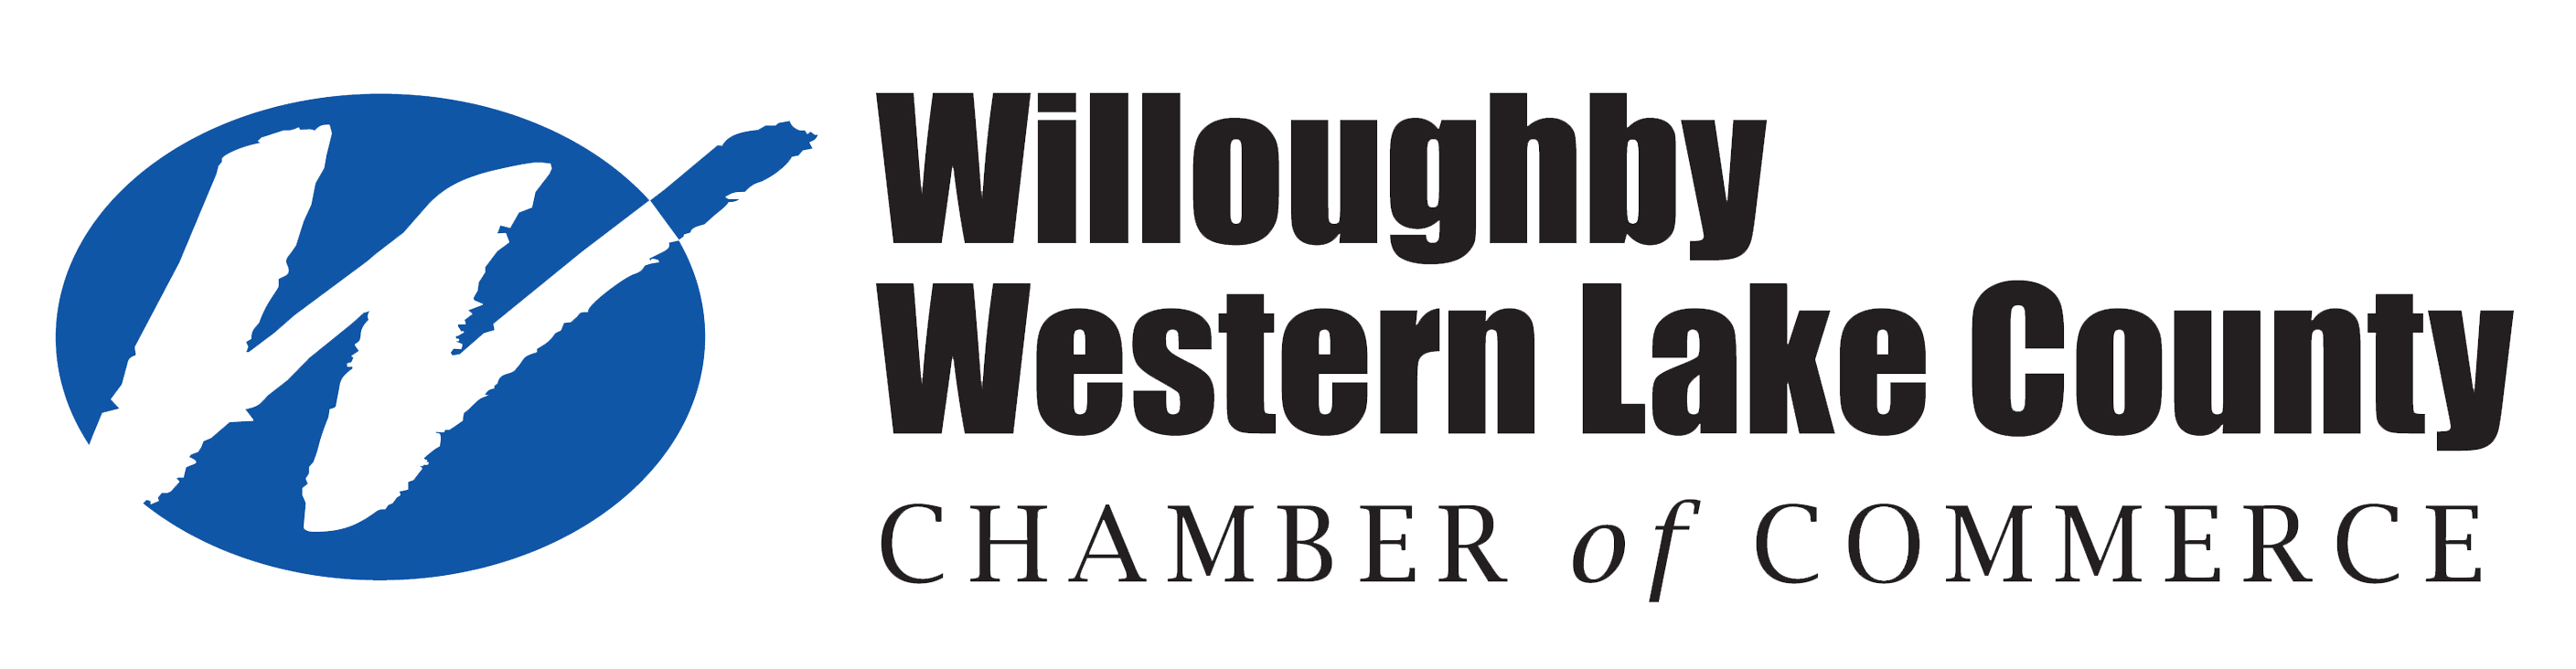 Willoughby Western Lake County Chamber of Commerce